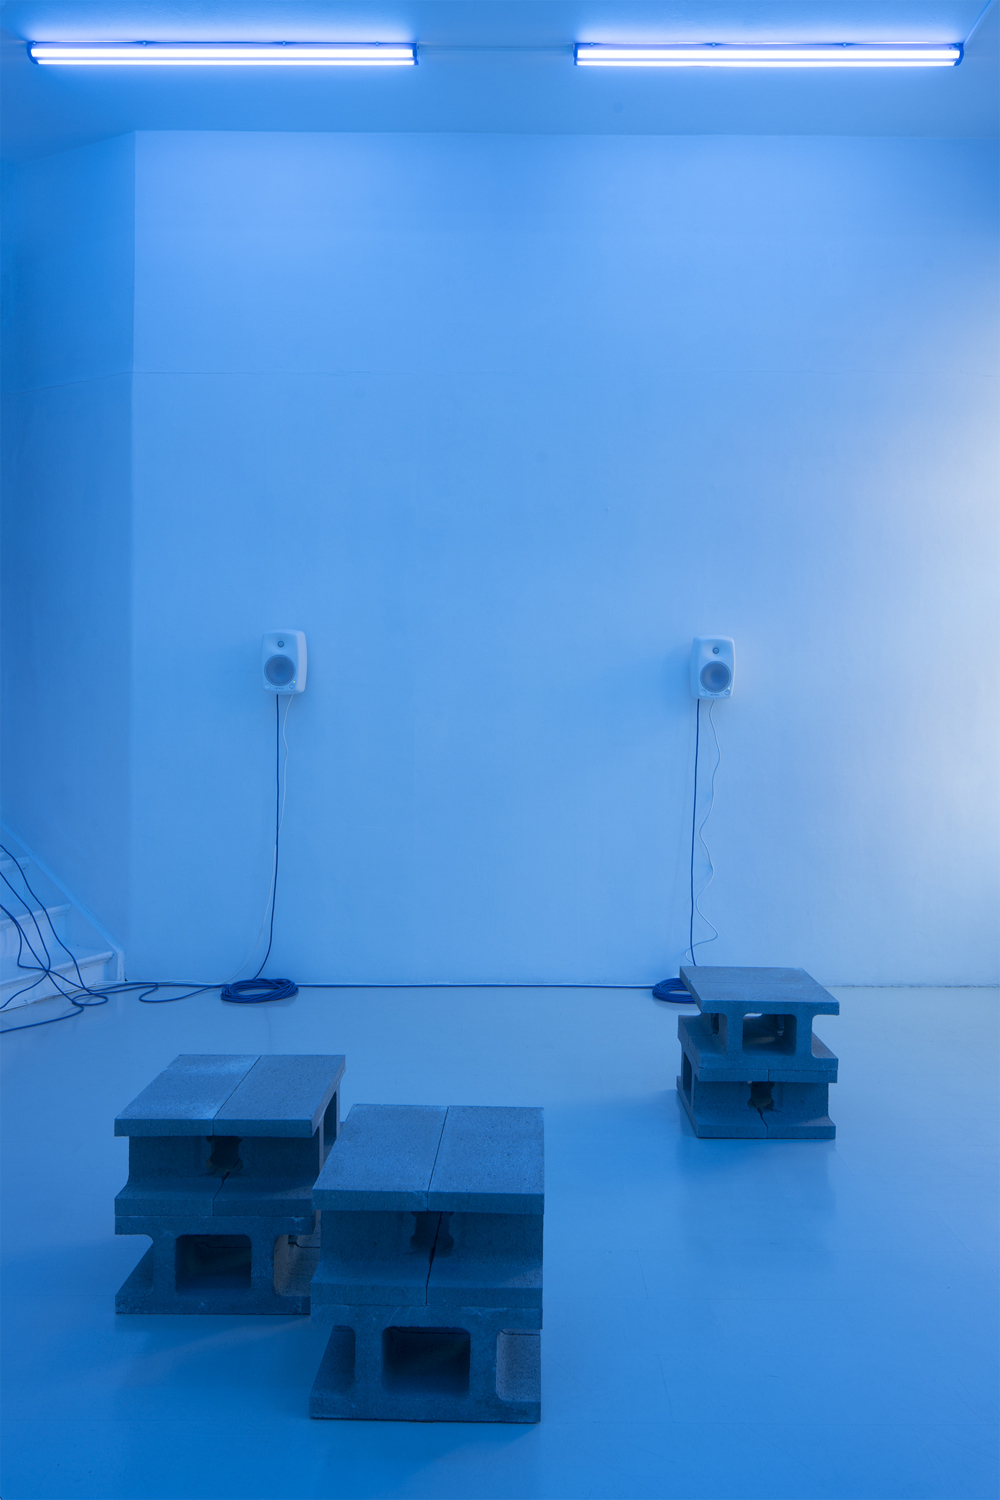 Fathia Mohidin &amp; Adele Kosman, Pumping Gas (You’ve Touched on More Water) installation view.